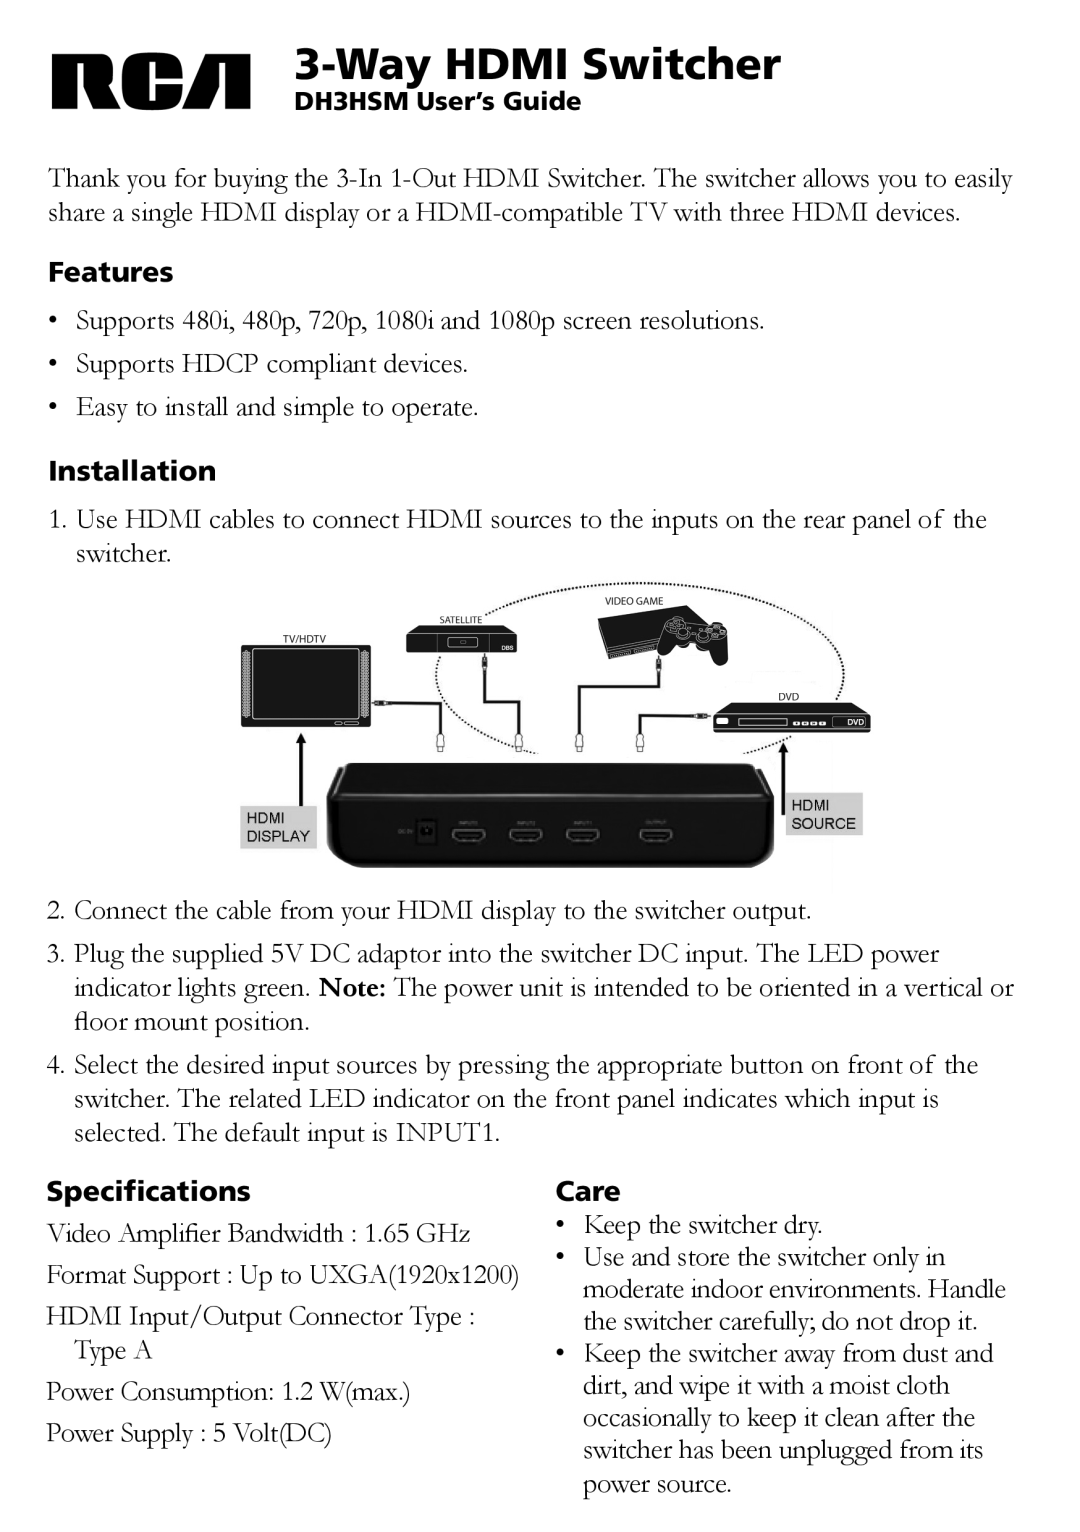 RCA DH3HSM specifications Way HDMI Switcher, Features, Installation, Specifications, Care 